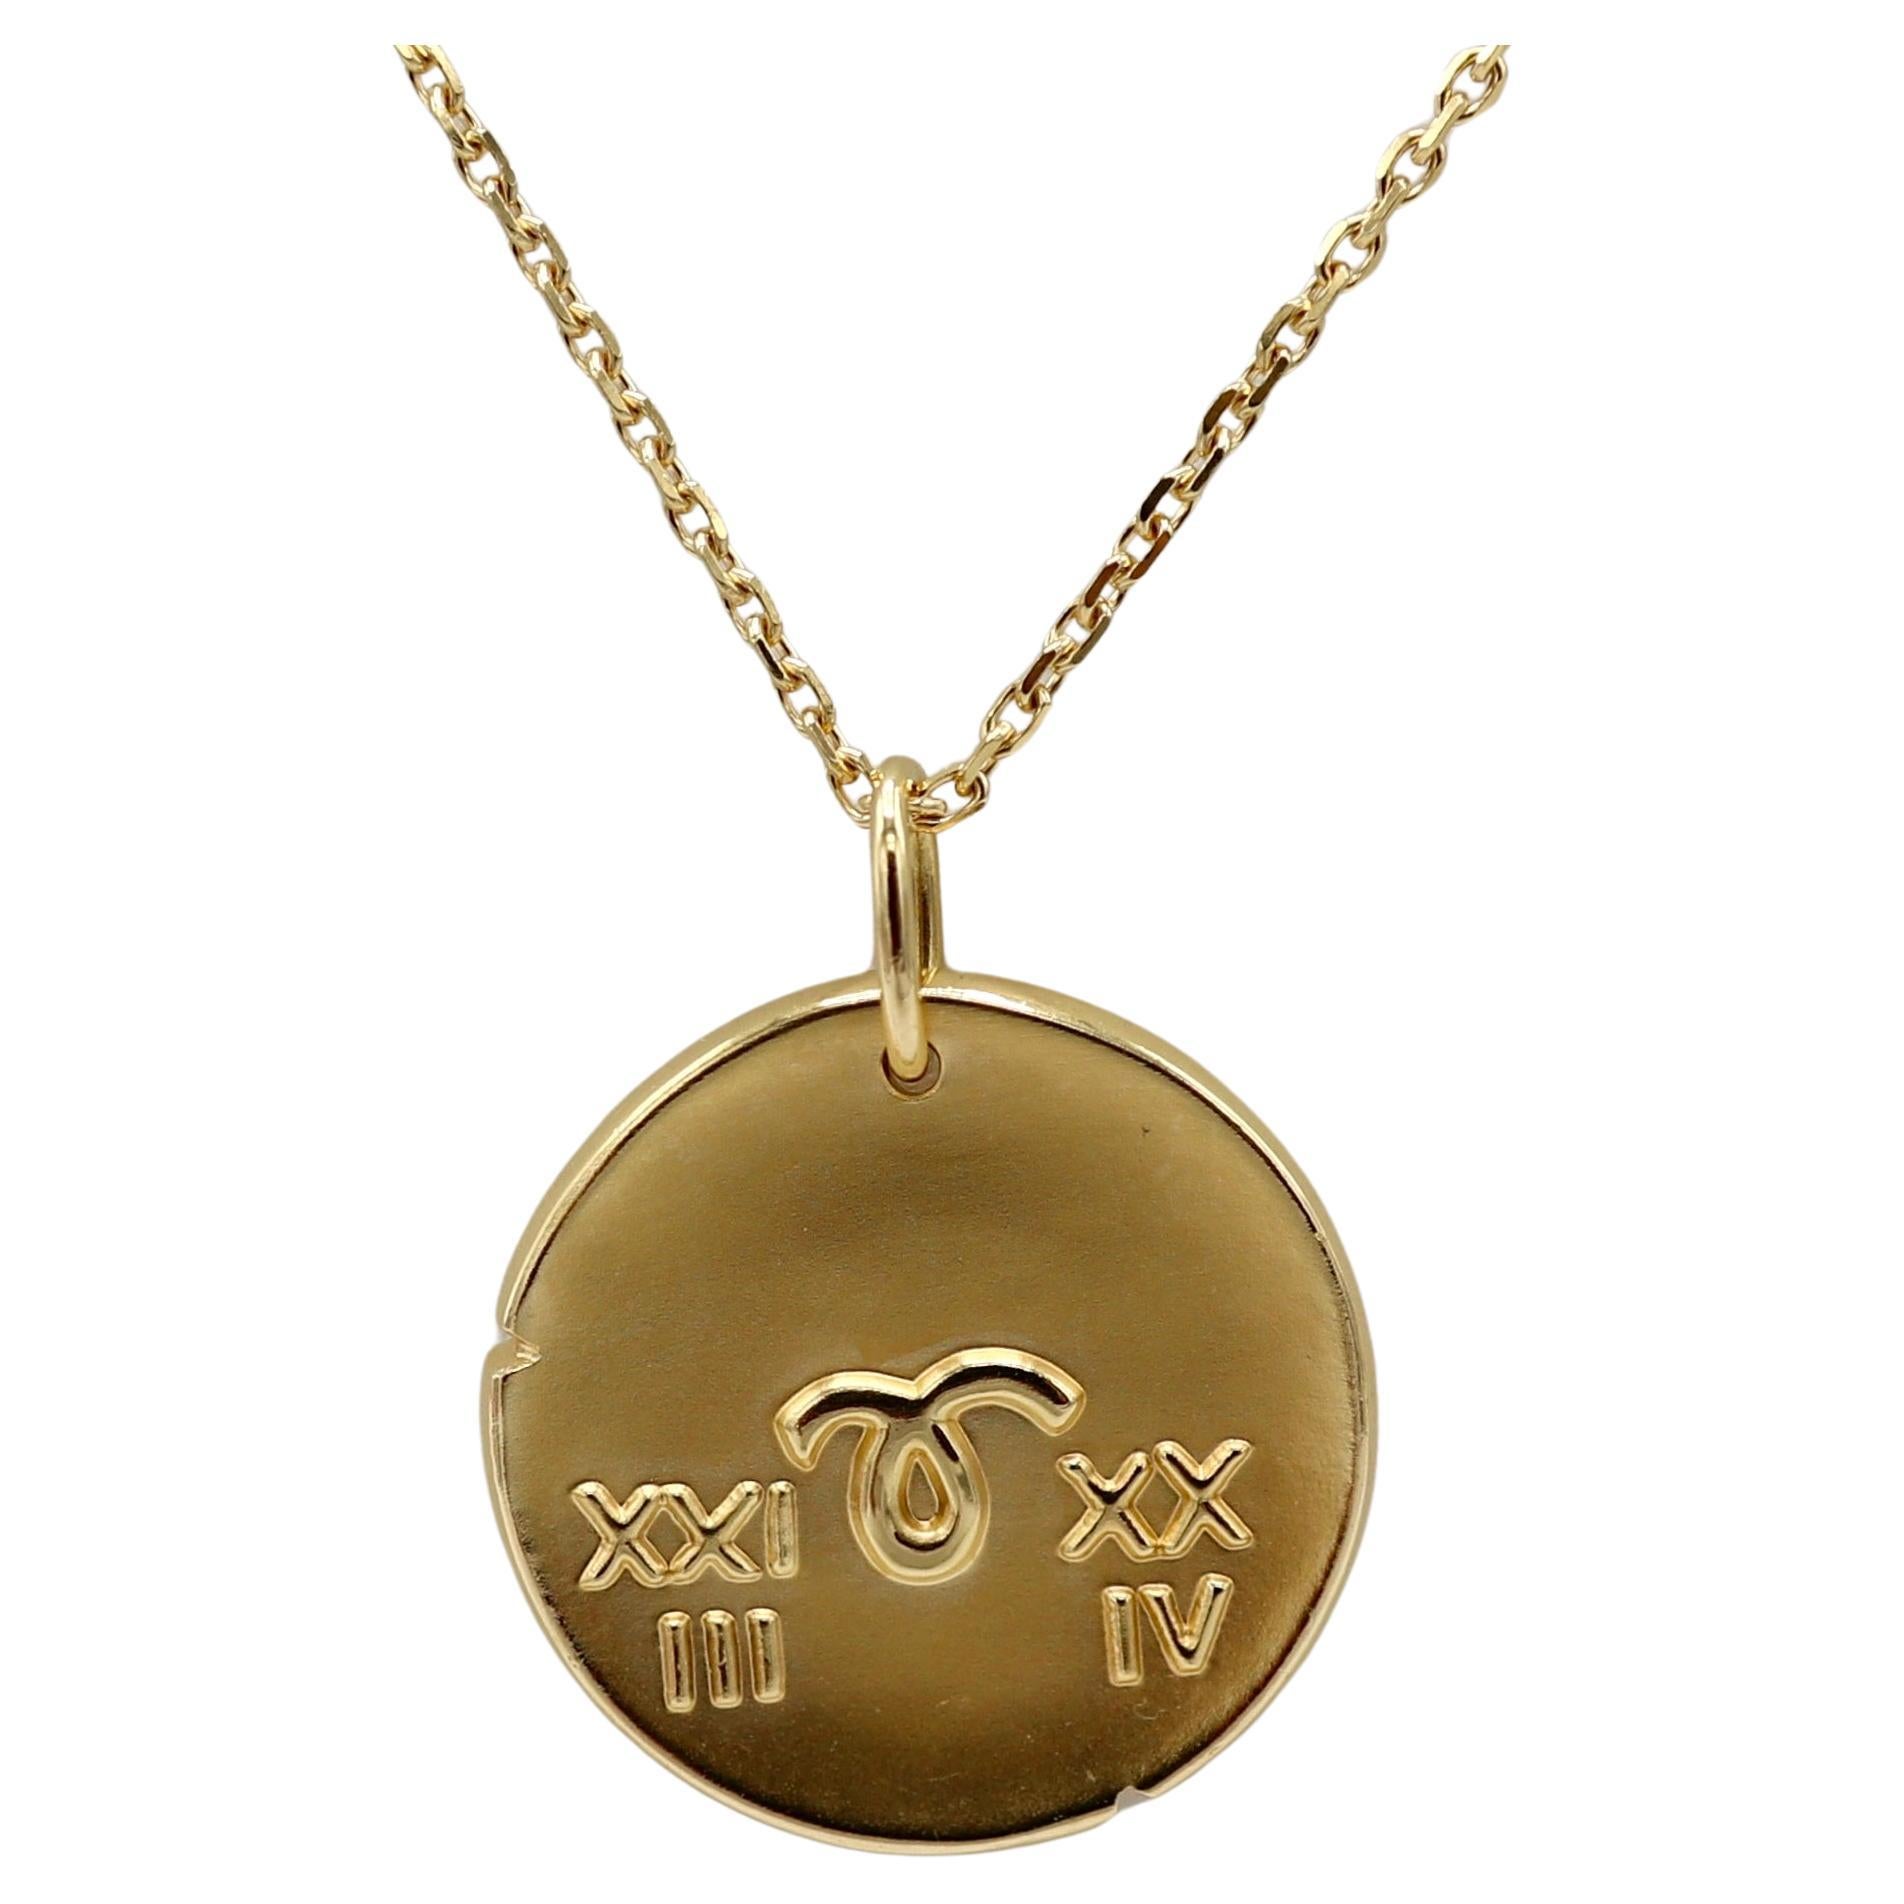 Van Cleef & Arpels VCA Zodiac Medal Aries 18 Karat Yellow Gold Pendant Necklace
Metal: 18k yellow gold
Weight: 11.54 grams
Pendant: 21.5mm
Zodiac sign: Aries March 21 - April 19
Chain: 16.5 inches 
Retail: Pendant: $2,430 USD, Chain $700 USD 
Note: